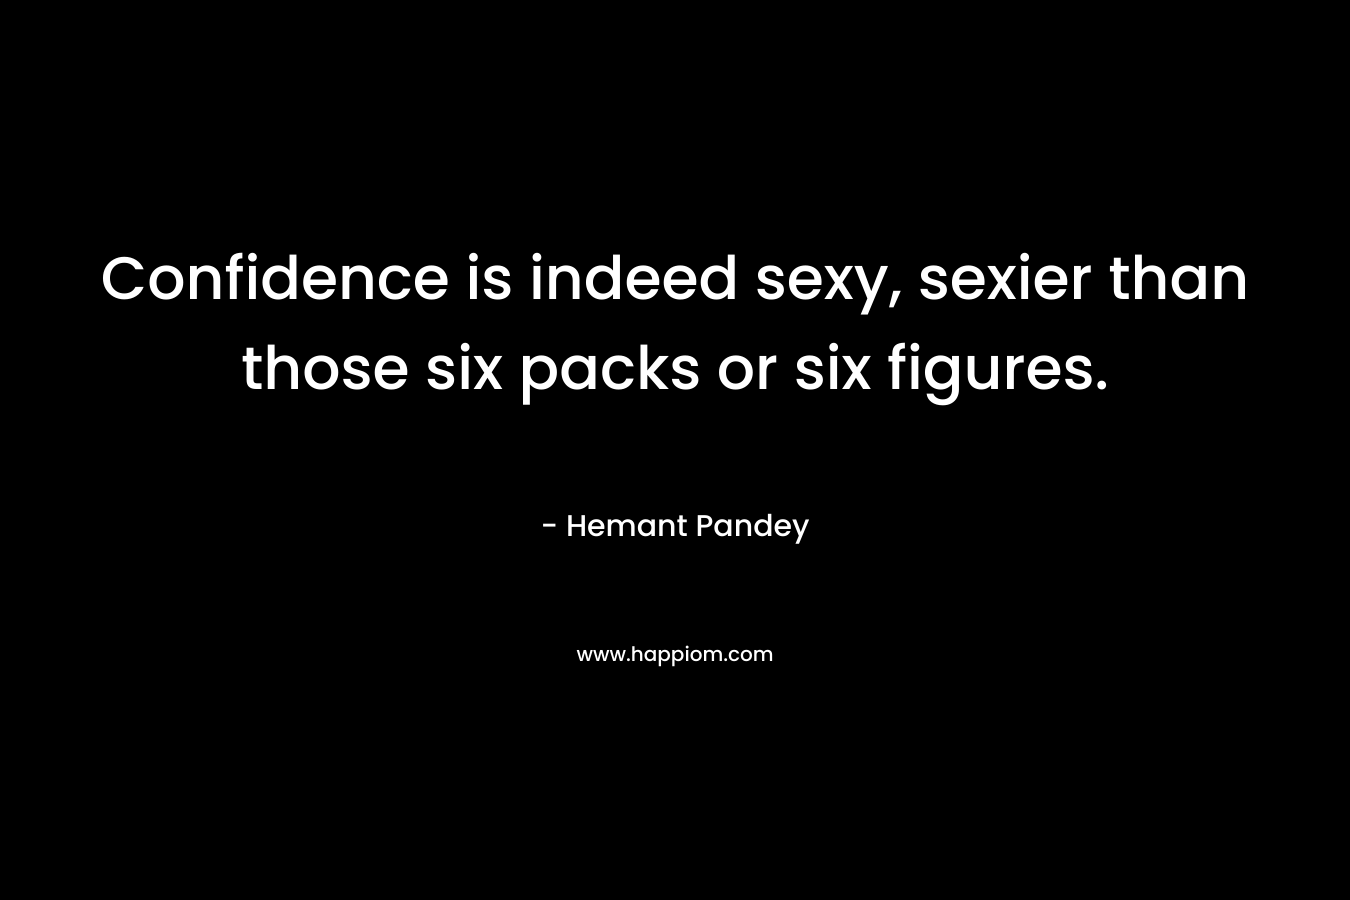 Confidence is indeed sexy, sexier than those six packs or six figures.